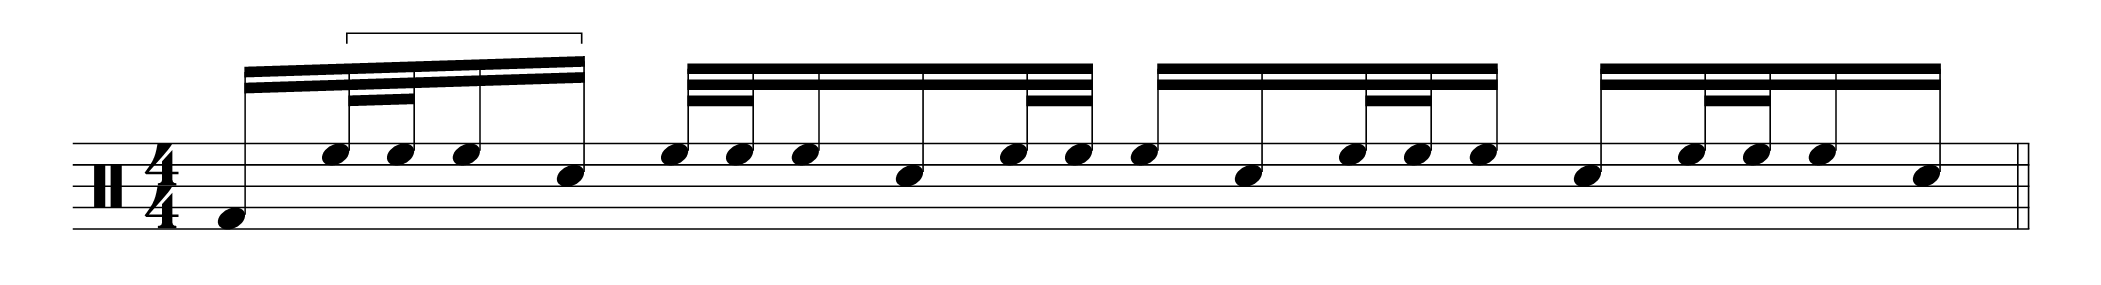 drum fill 3 notes group